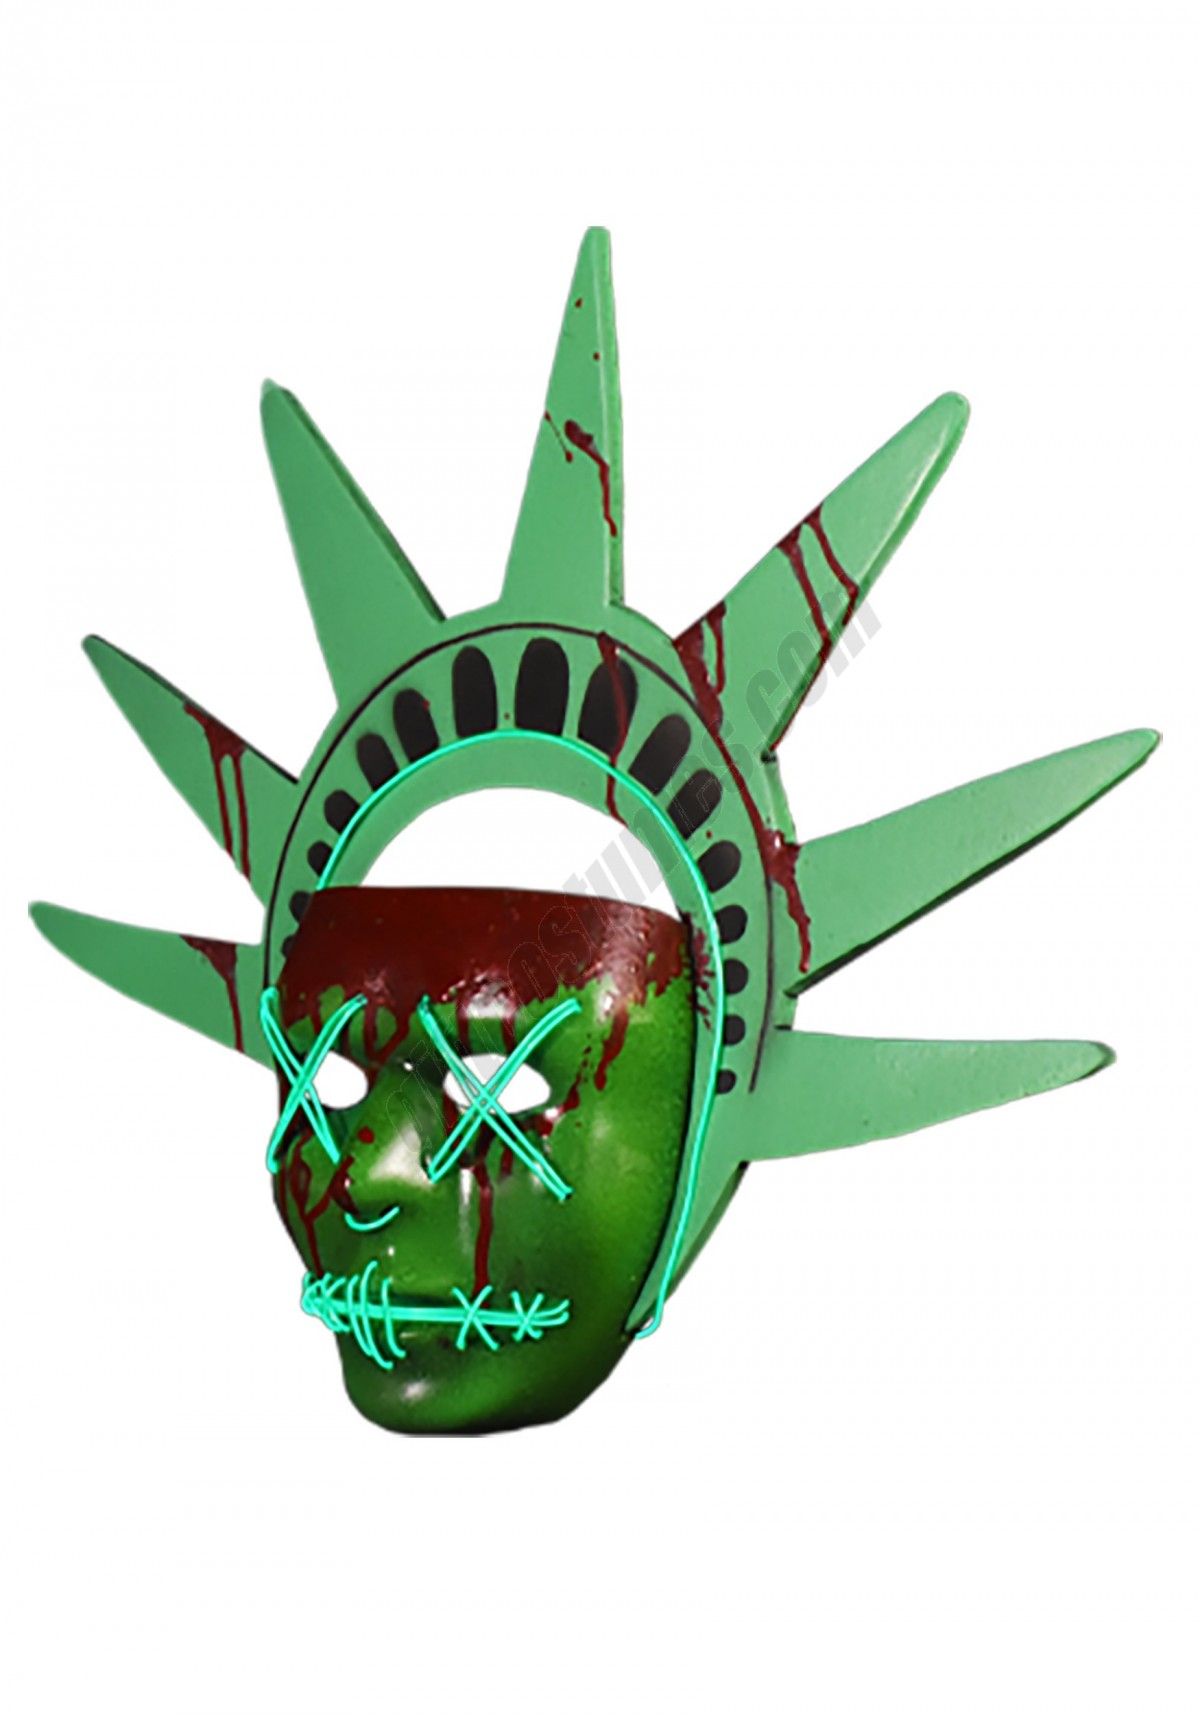 Lady Liberty Light Up Mask from The Purge Promotions - -1